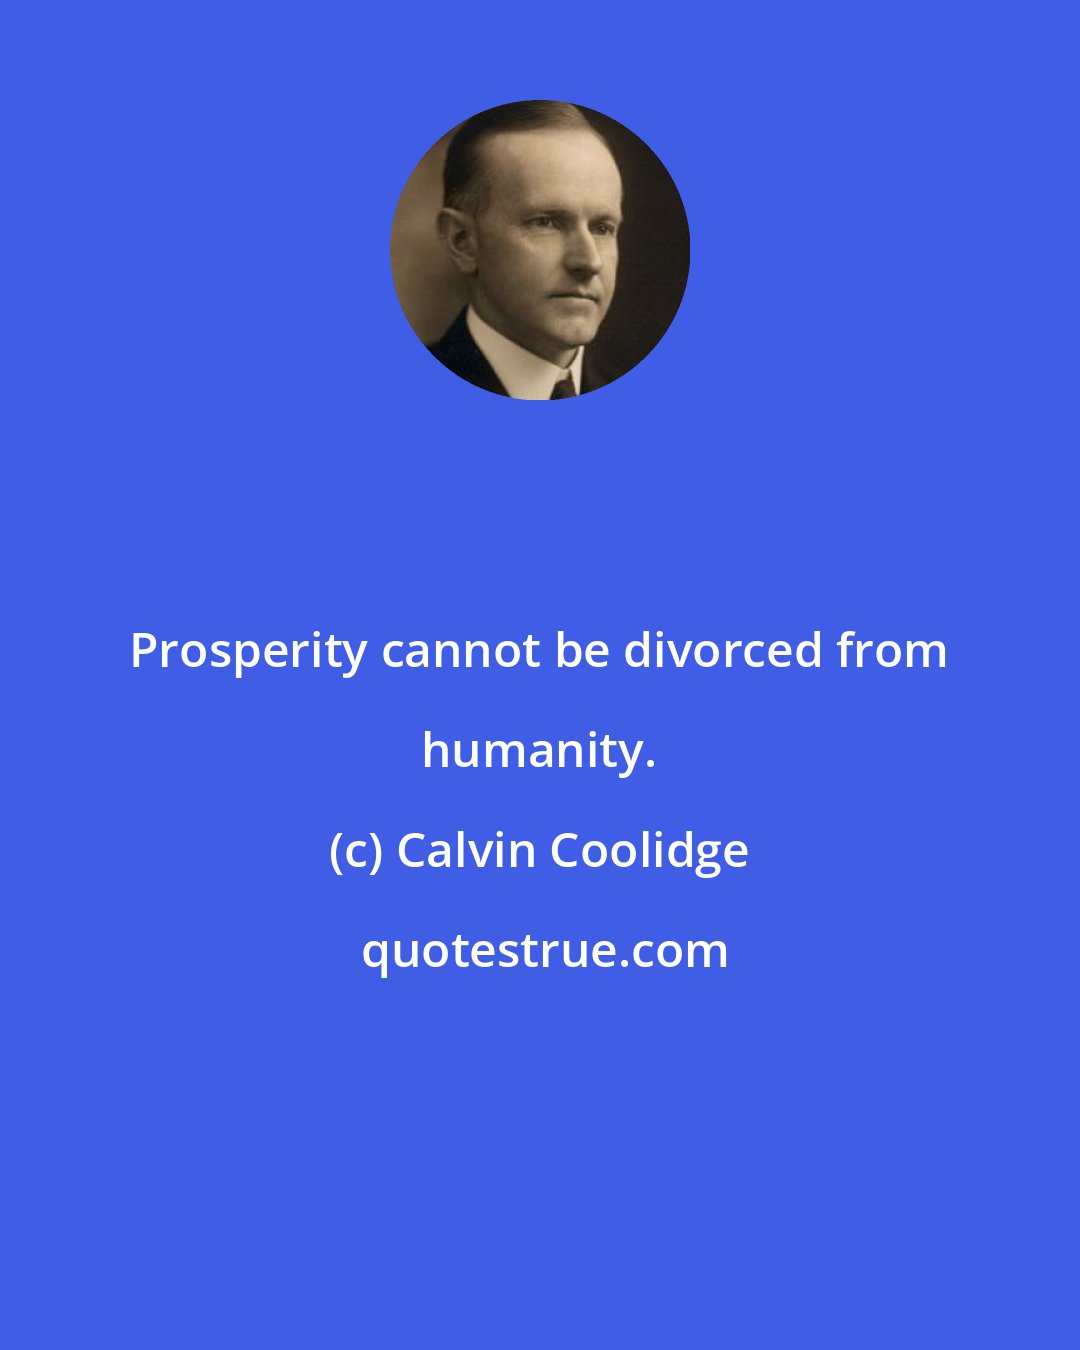 Calvin Coolidge: Prosperity cannot be divorced from humanity.